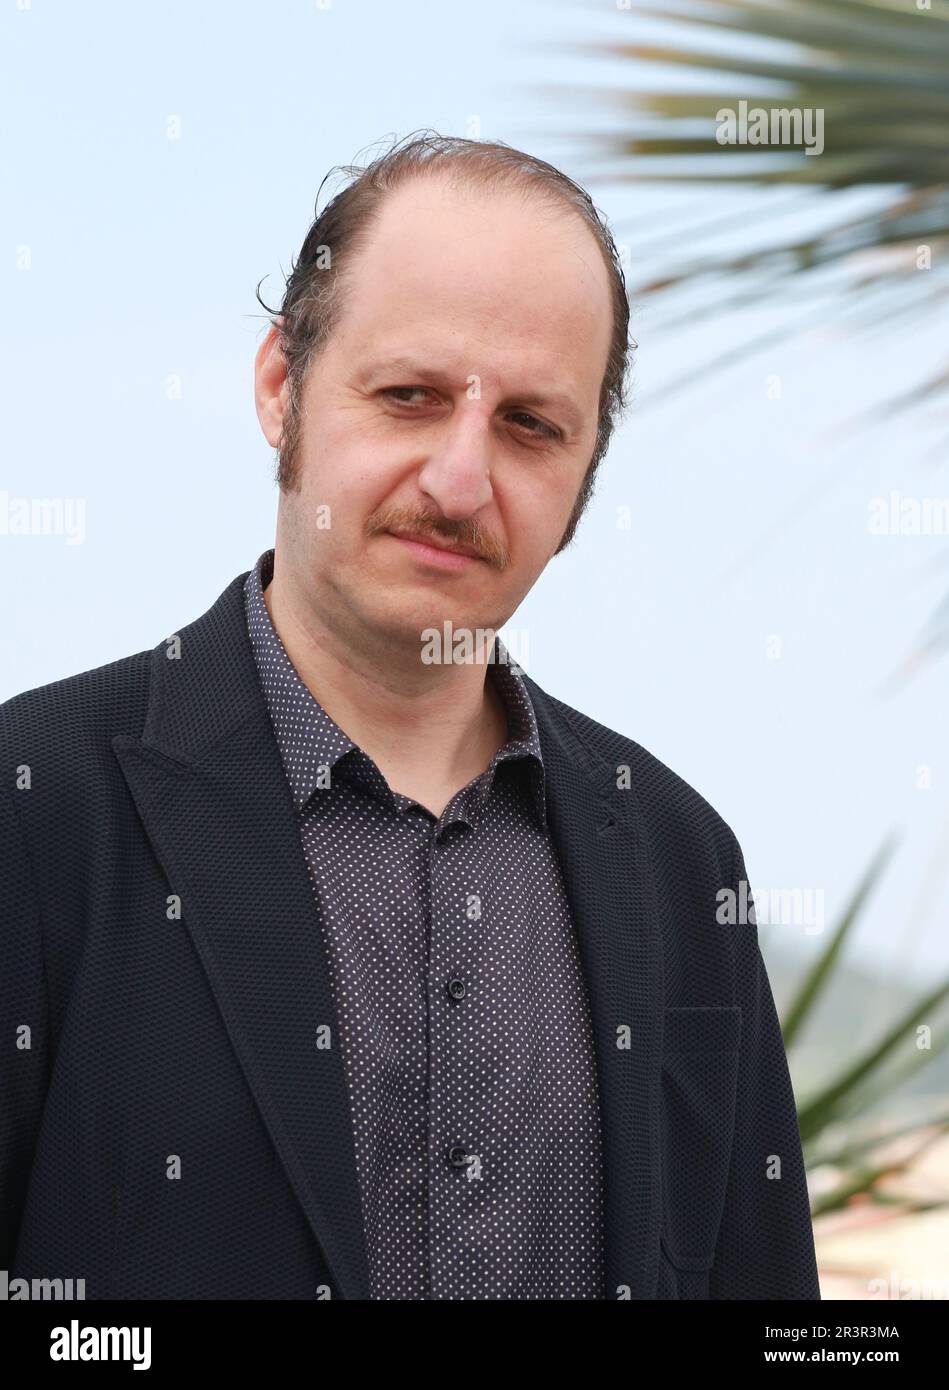 Cannes, France, 24th May, 2023. Fausto Russo Alesi at the photo call for the film Kidnapped (Rapito) at the 76th Cannes Film Festival. Photo Credit: Doreen Kennedy / Alamy Live News. Stock Photo